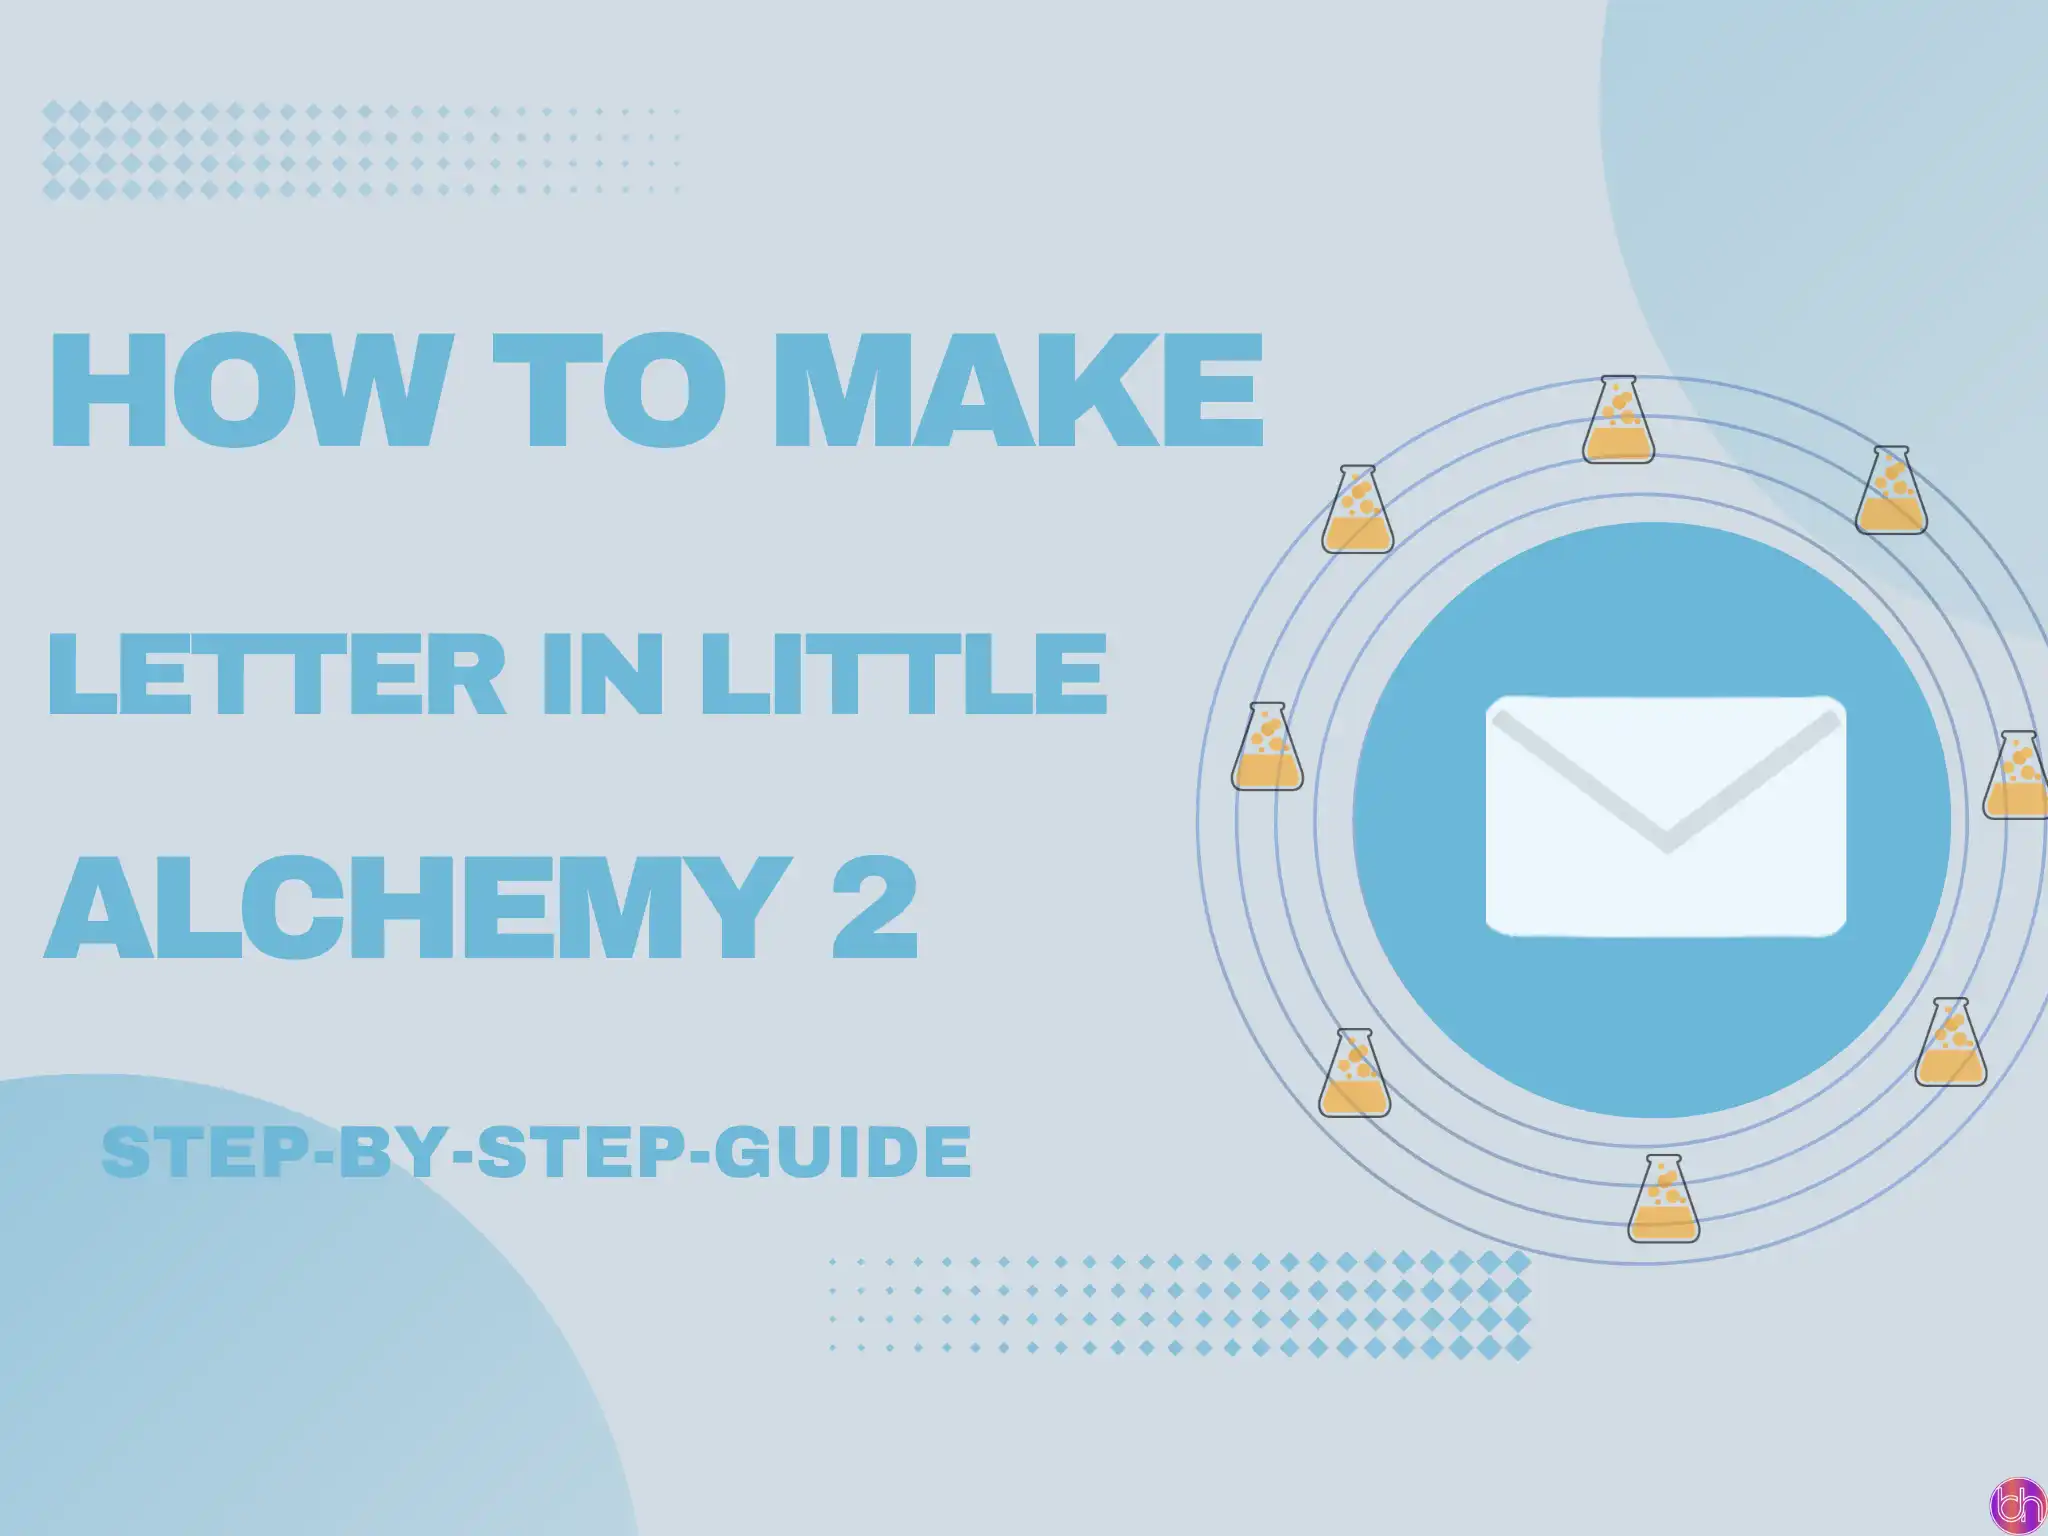 How to make Letter in Little Alchemy 2